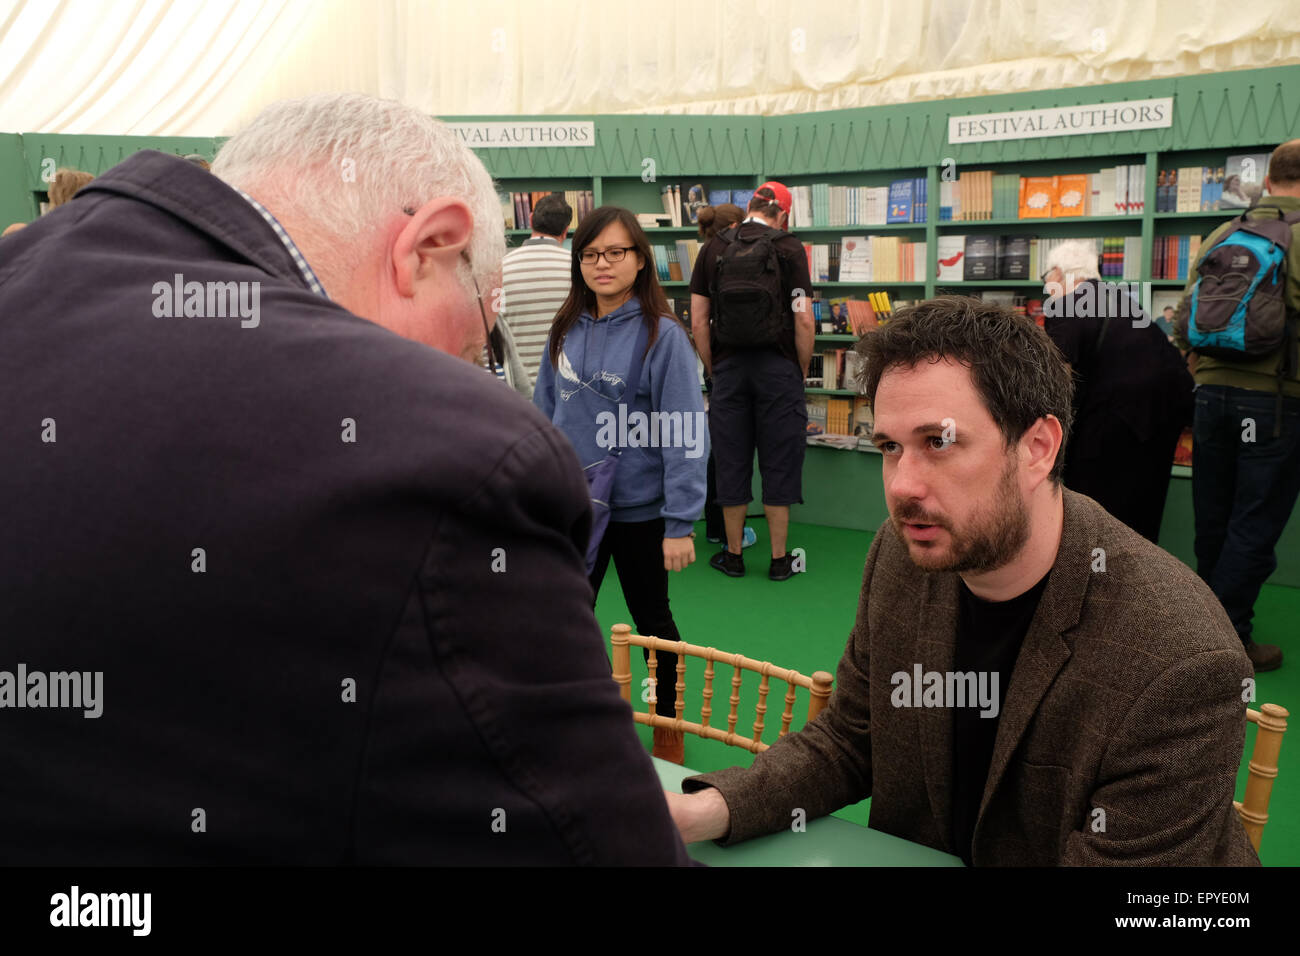 Hay Festival, Powys, Wales - May 2015 - Author Peter Moore signs copies of his latest book The Weather Experiment for fans in the Festival bookshop. Stock Photo